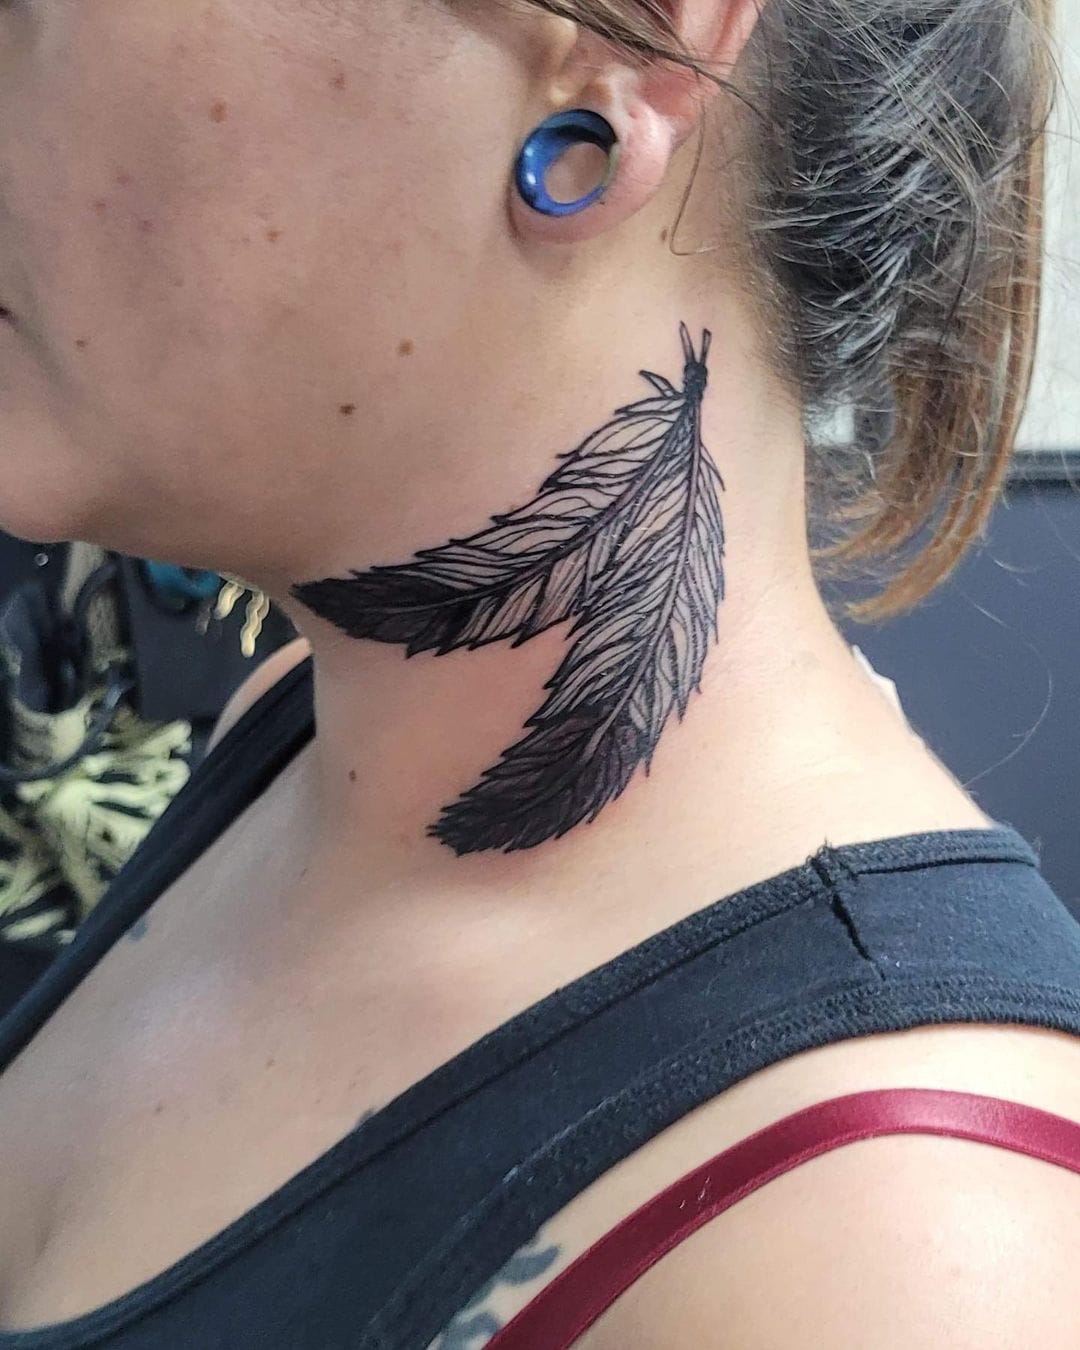 Angels Tattoo & Piercings - A colourful Peacock feather on the ribs,by Tom  | Facebook